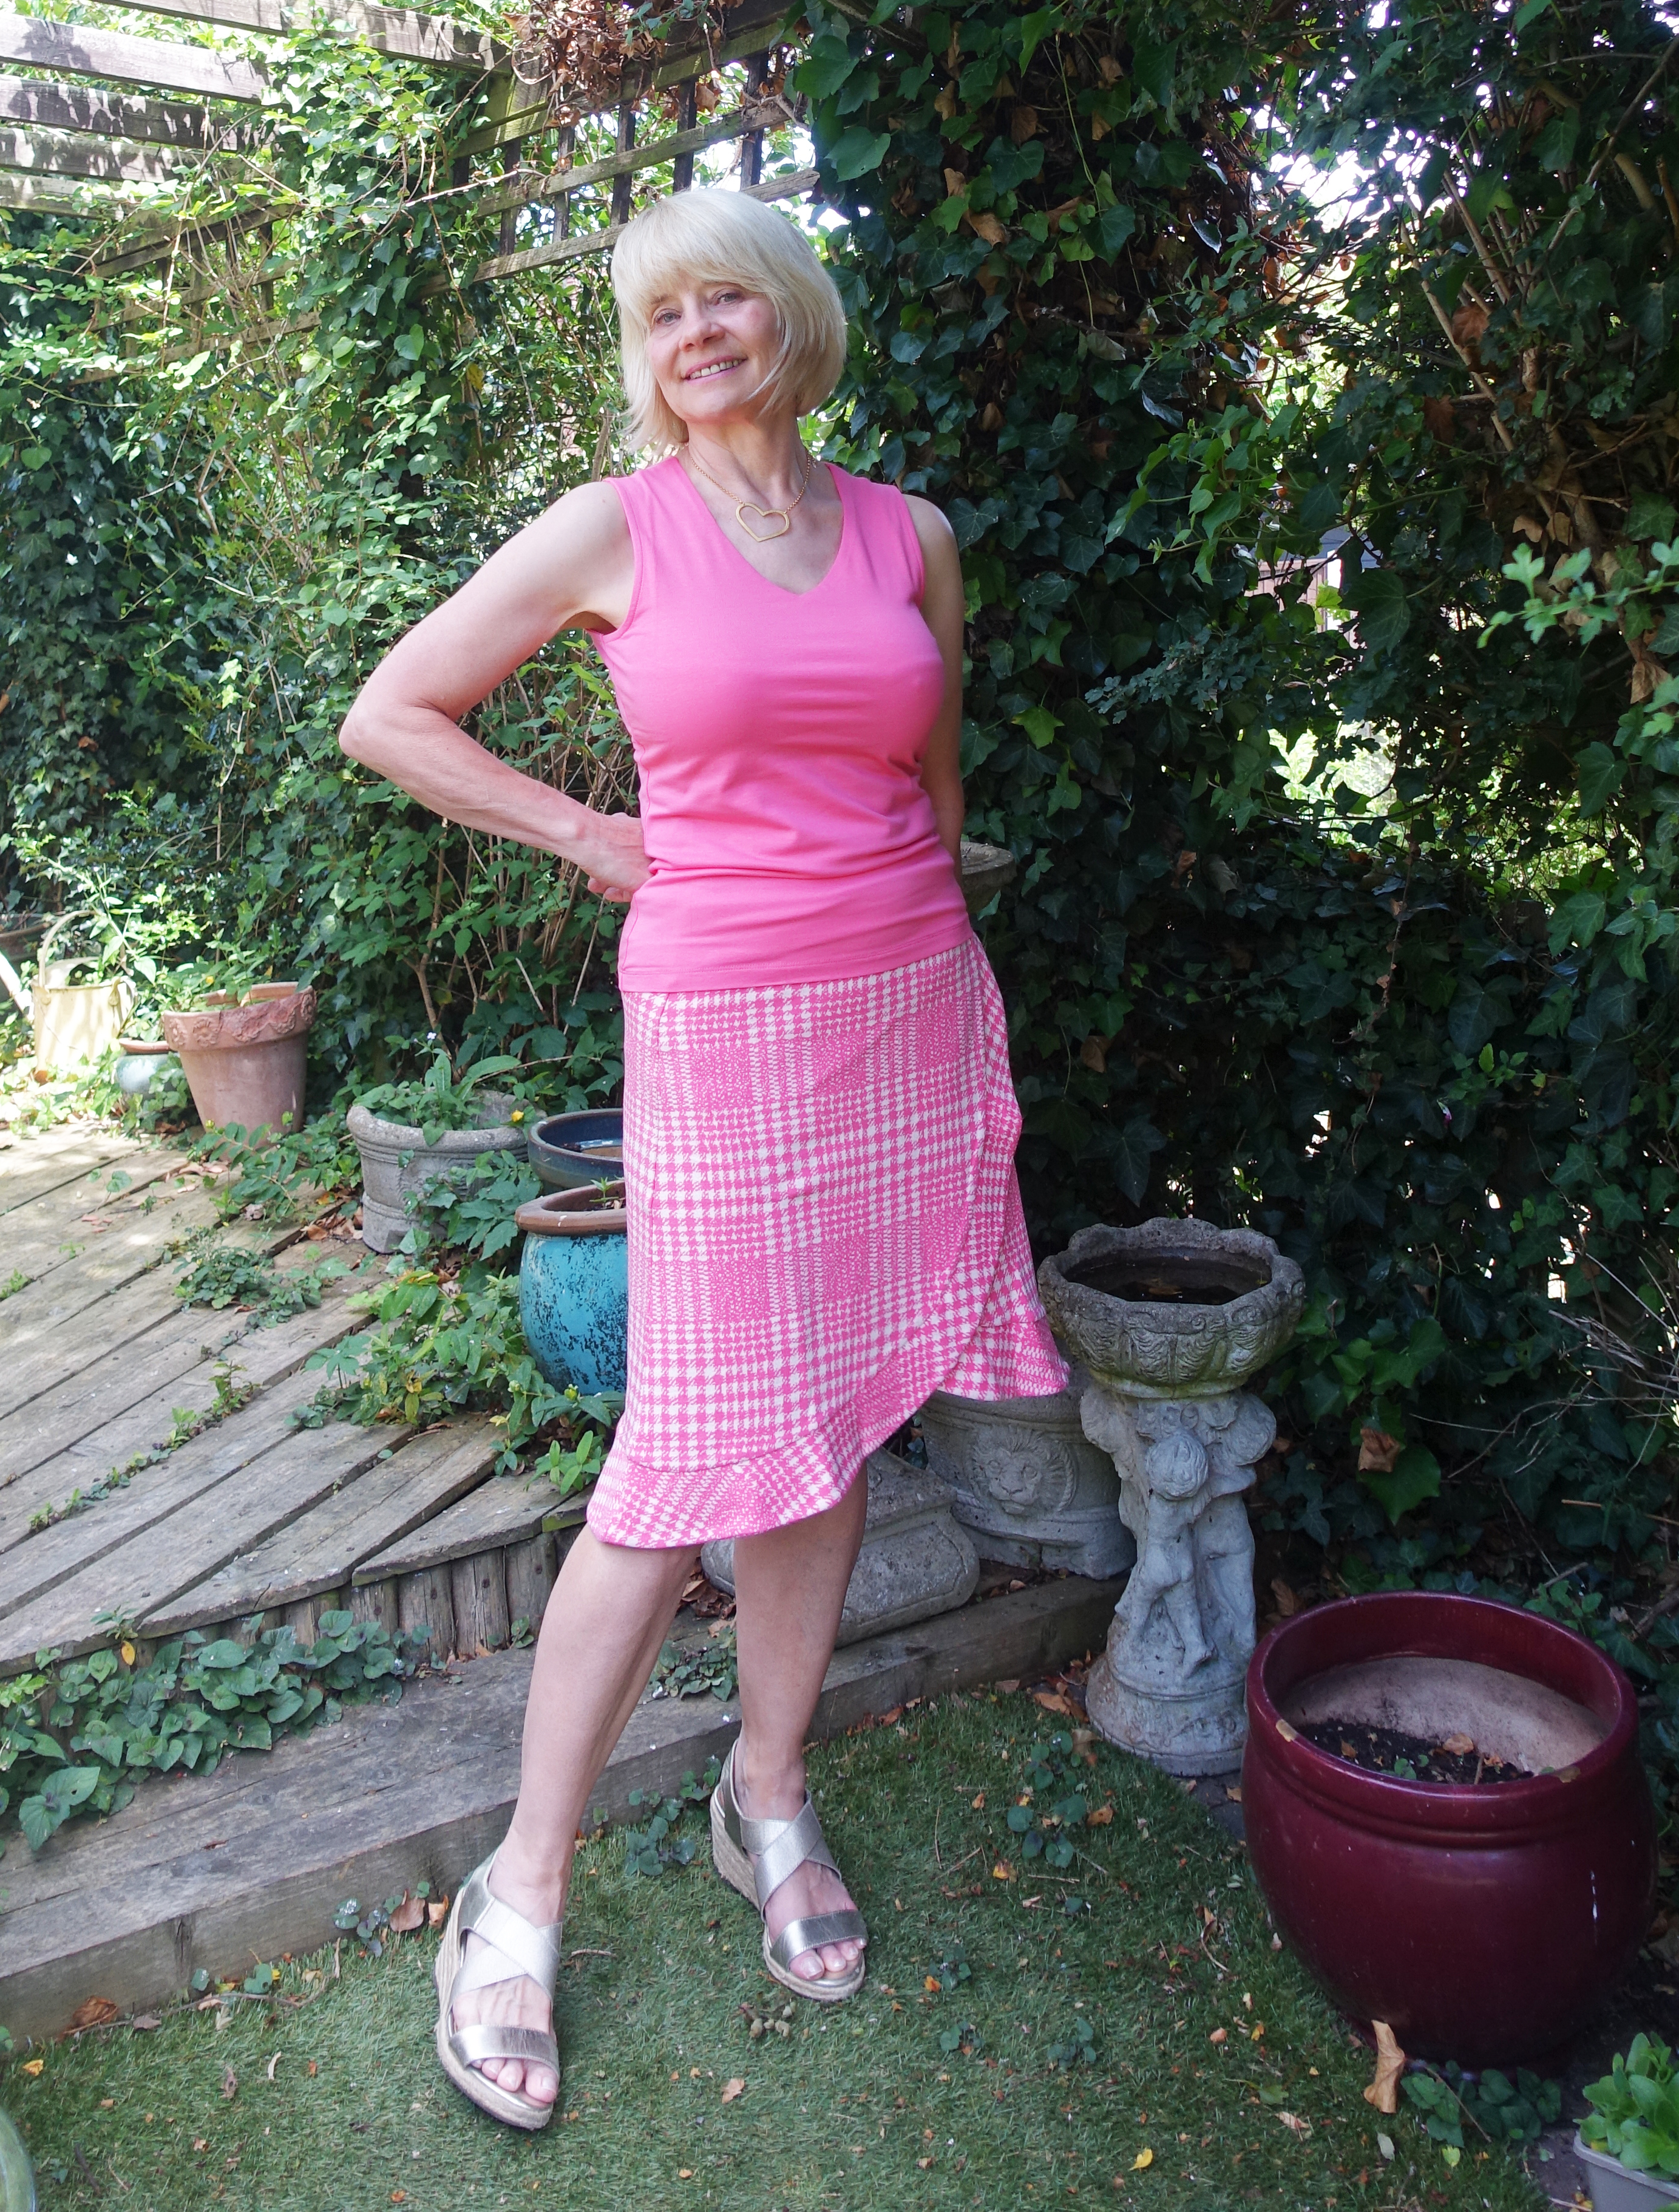 Is This Mutton blogger Gail Hanlon in the new spring colors of her color analysis re-rate